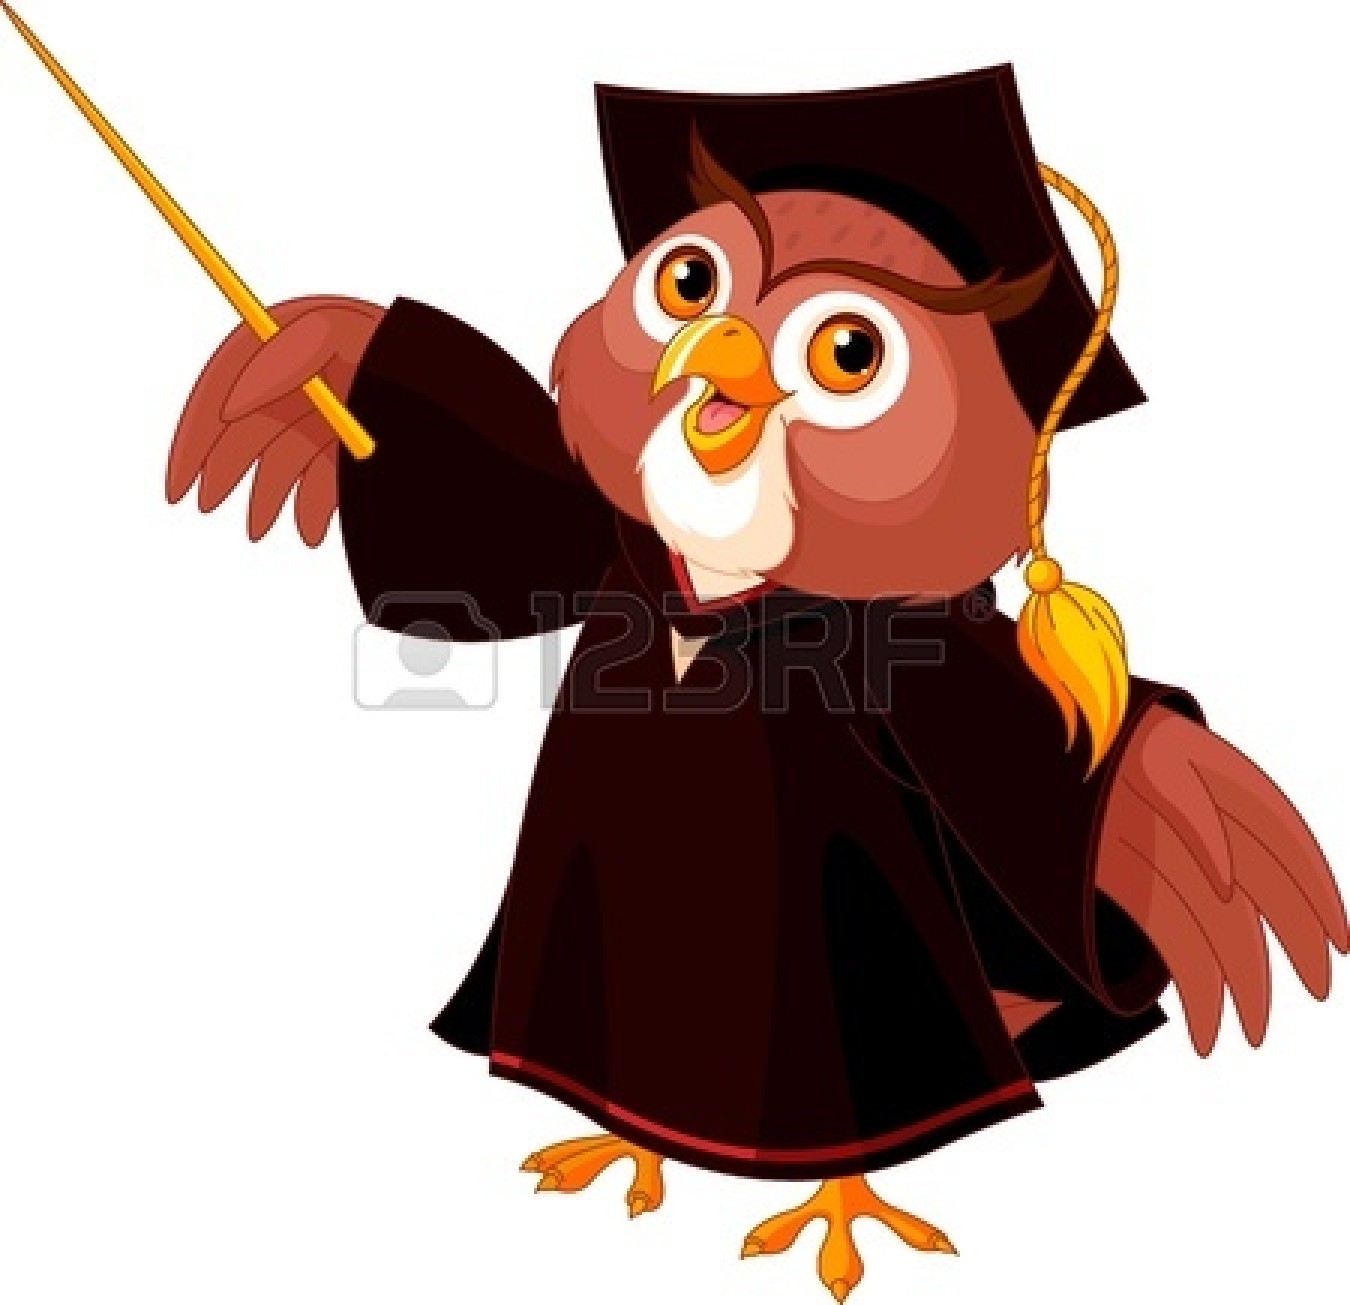 Wise Owl Pictures 19487949 Cartoon Of Pointing Wise Owl Jpg